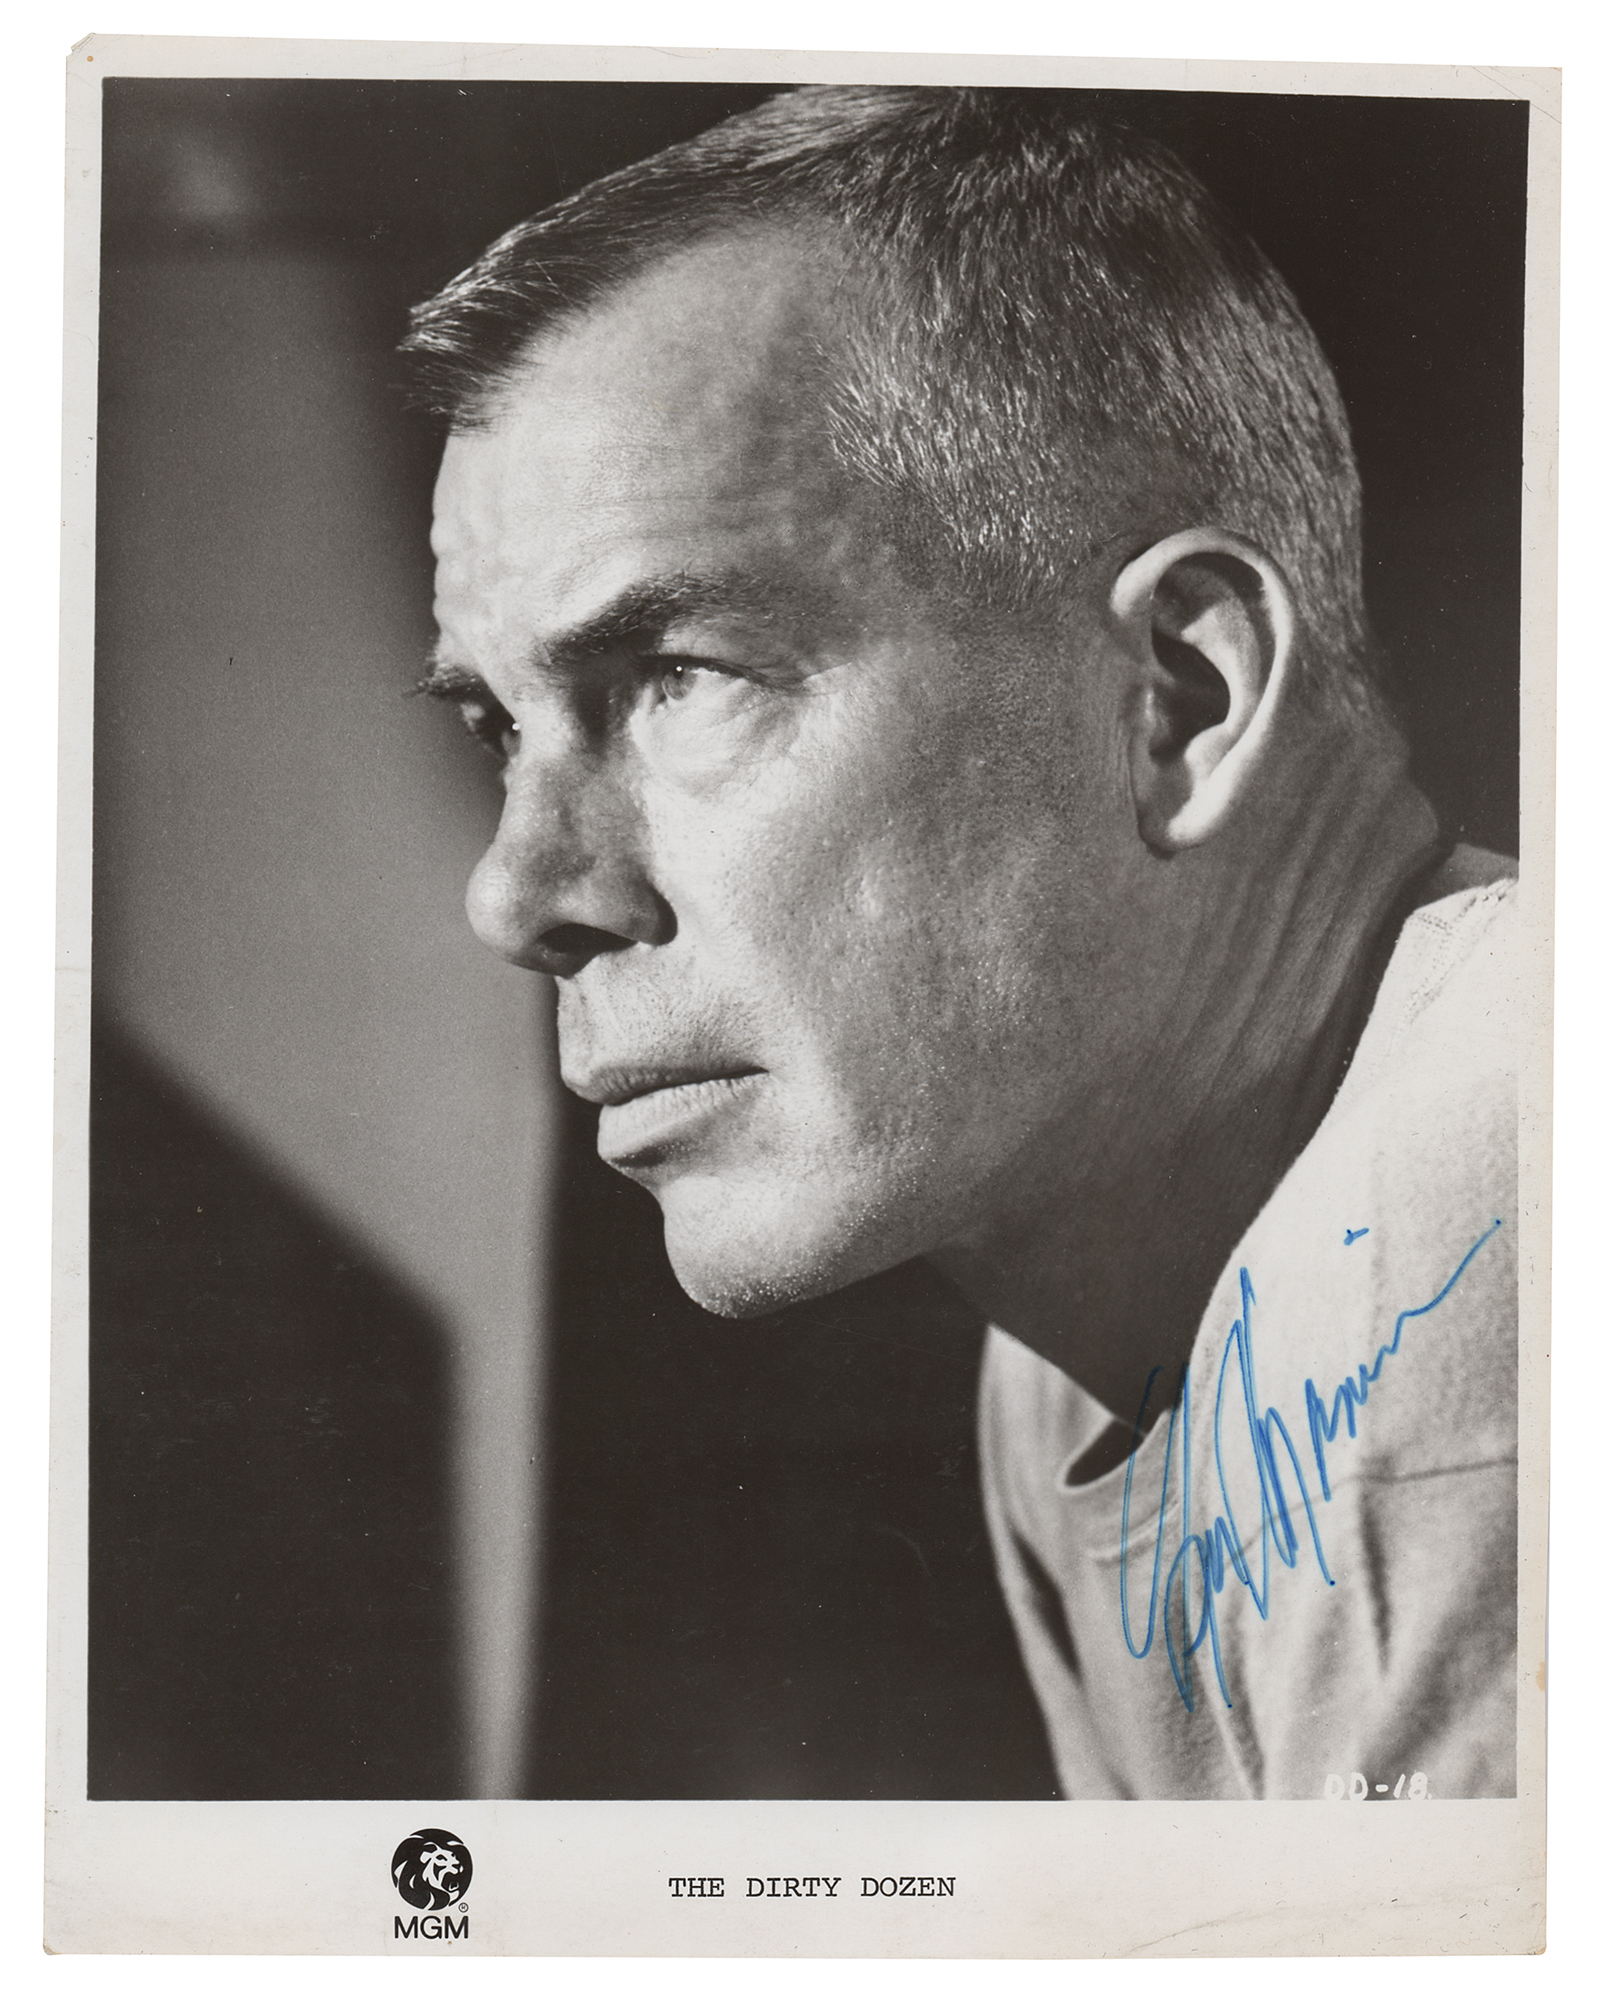 Lee Marvin Signed Photograph | Sold for $1,305 | RR Auction